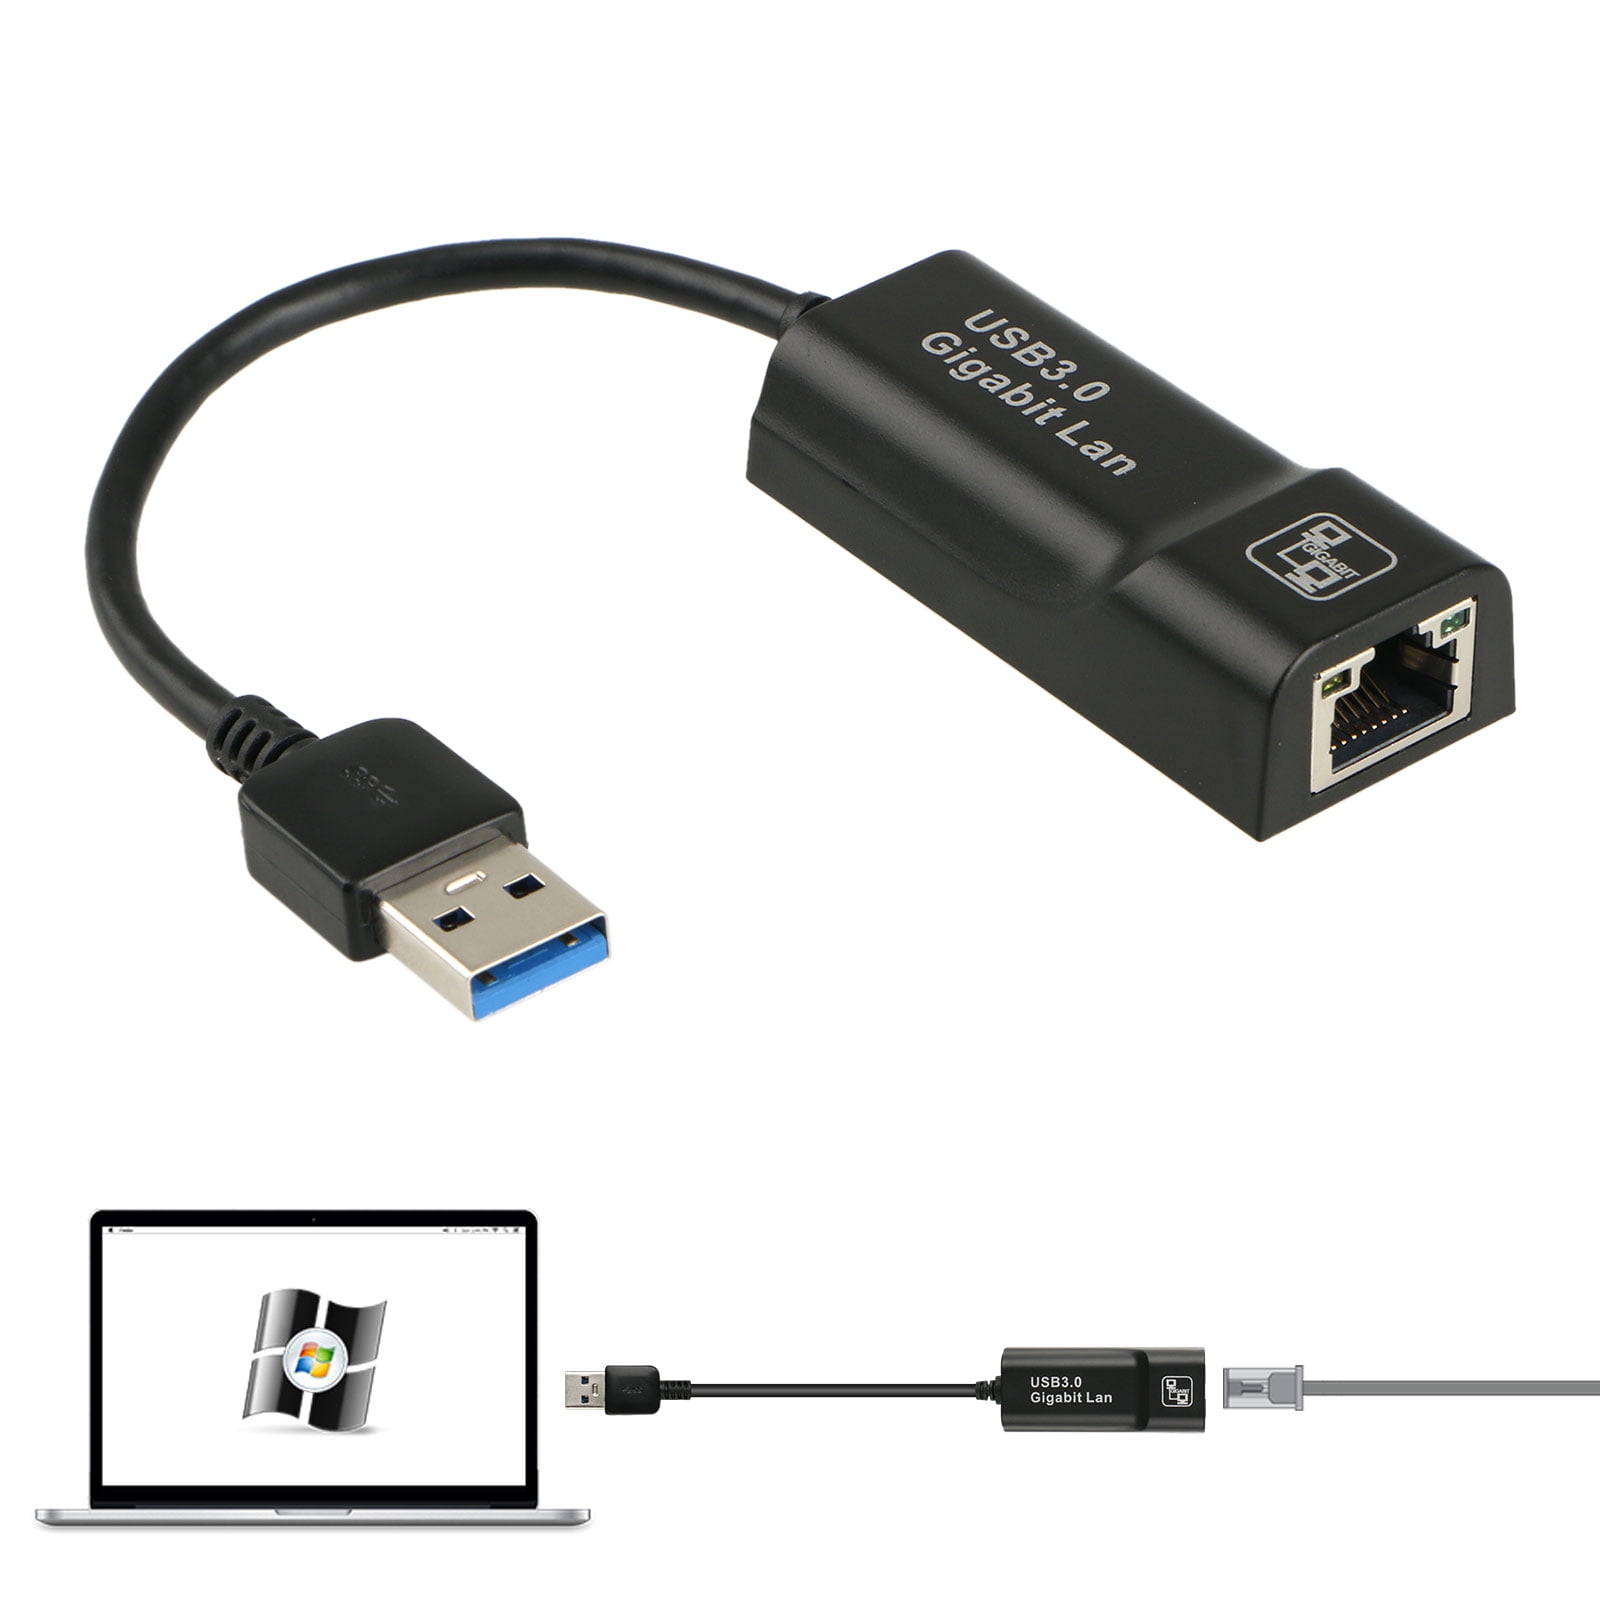 LAN Cable 2 PCS USB3.0 Gigabit Network Card Laptop External Wired USB to RJ45 Network Cable Interface Ethernet Cables 